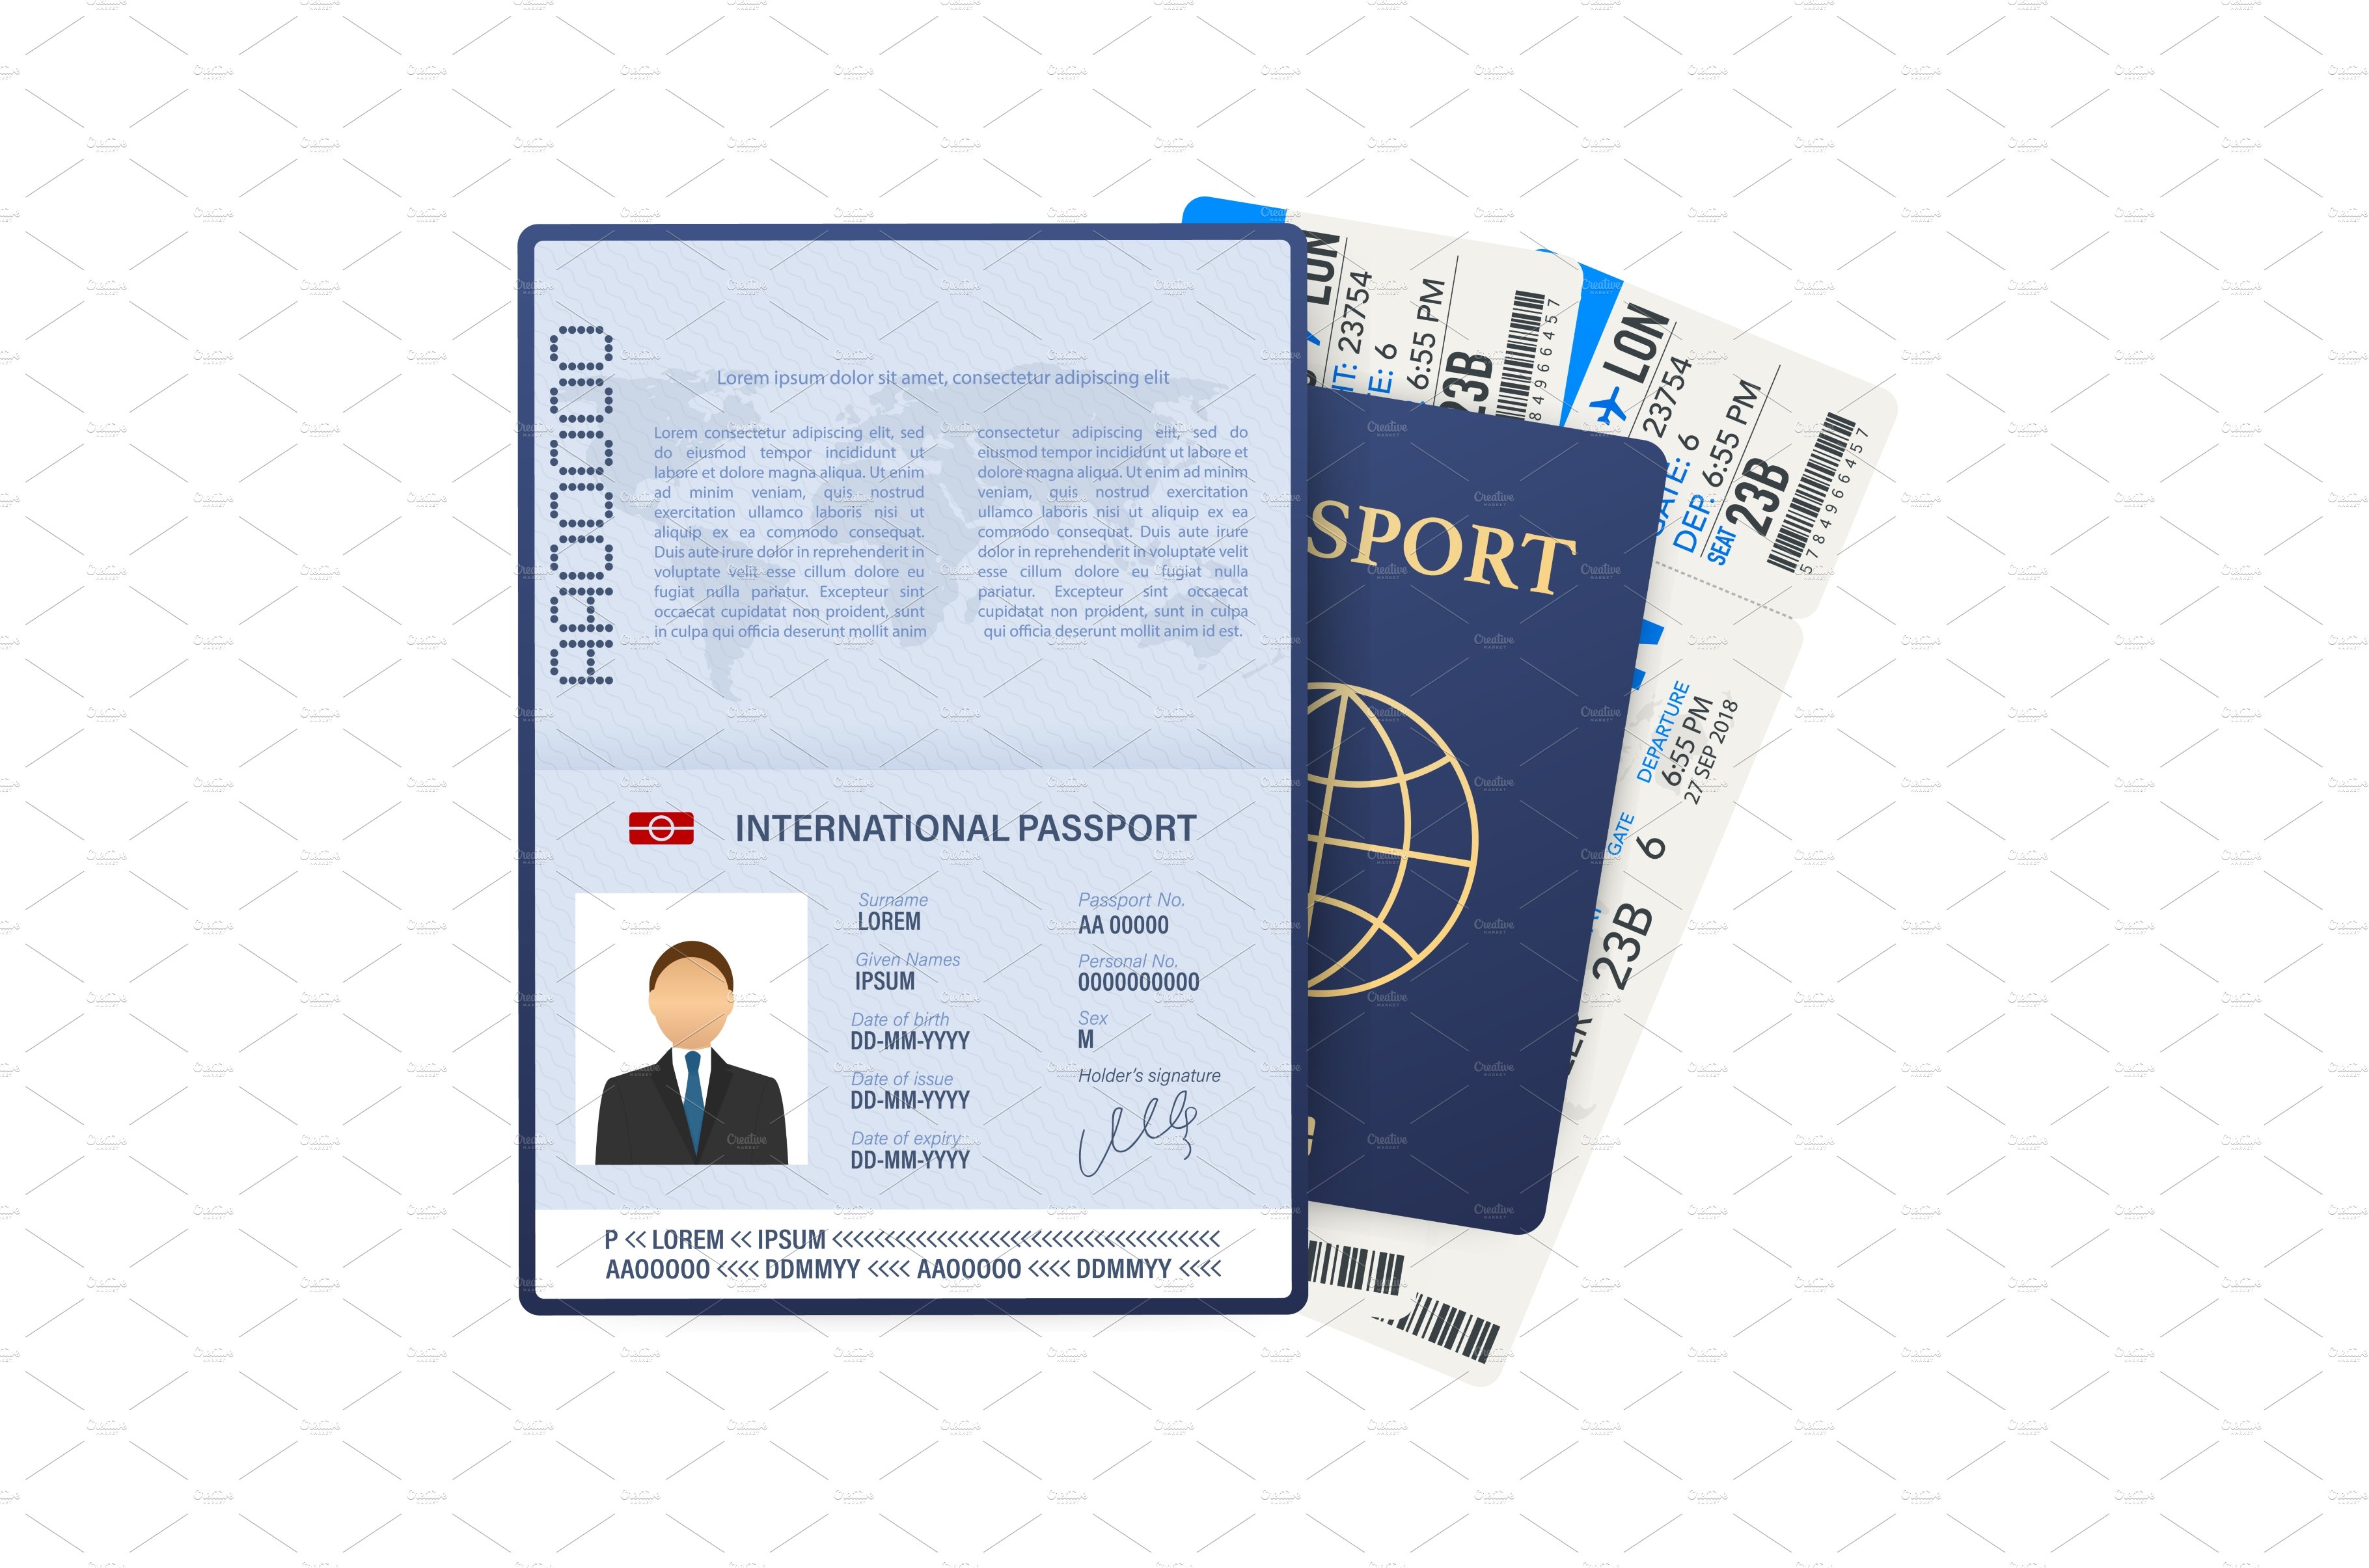 Passport with tickets. Air travel cover image.